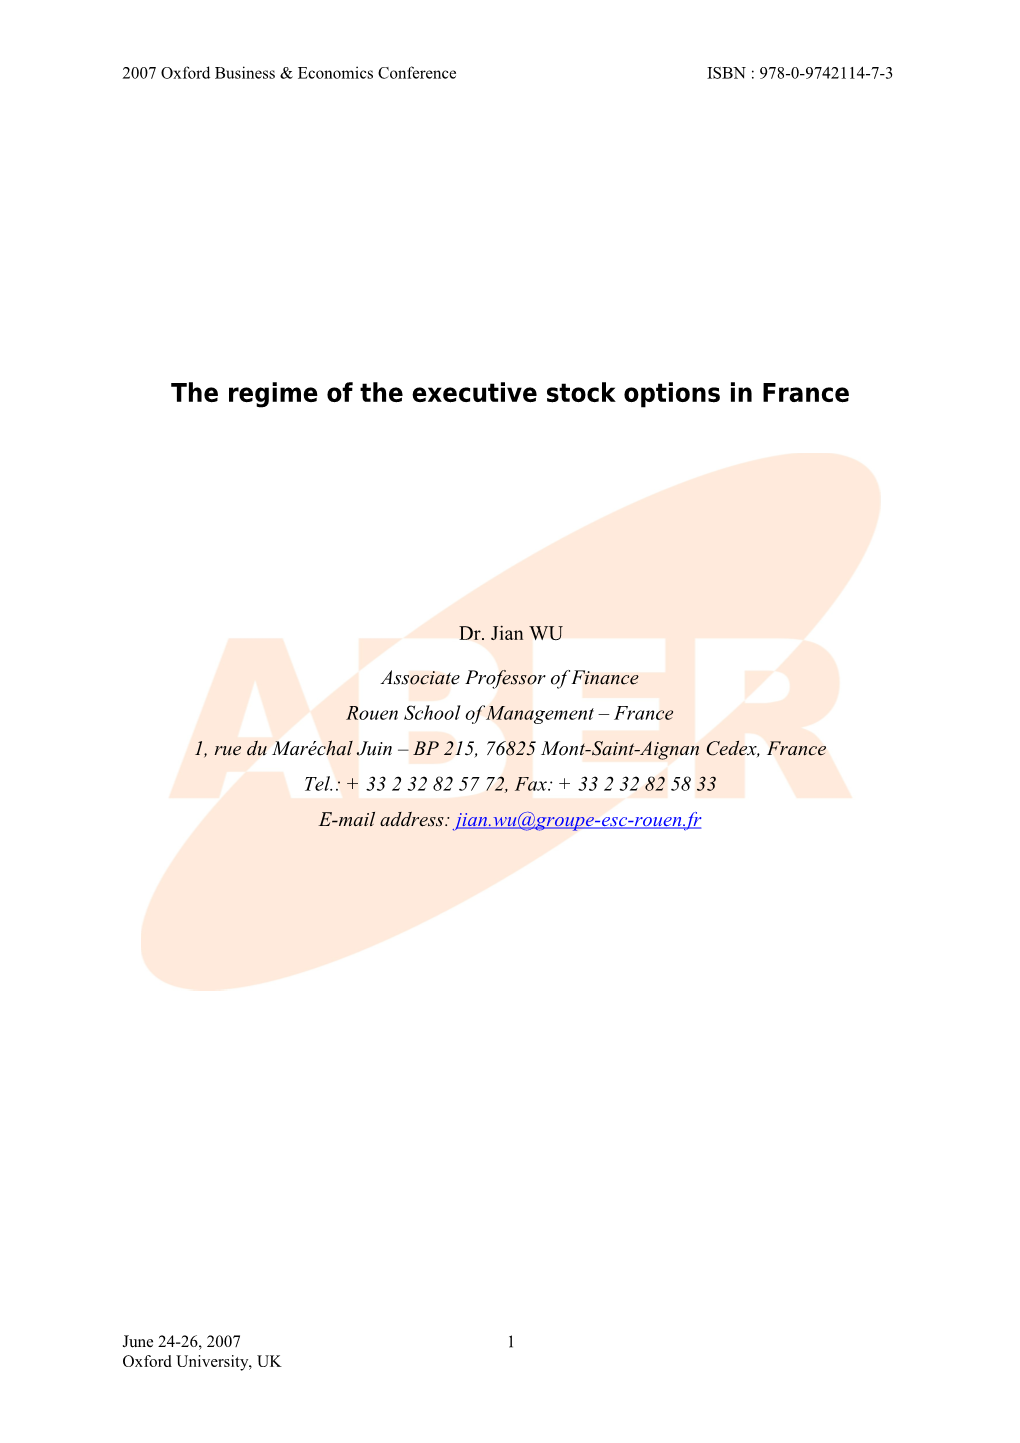 The Regime of the Executive Stock Options in France